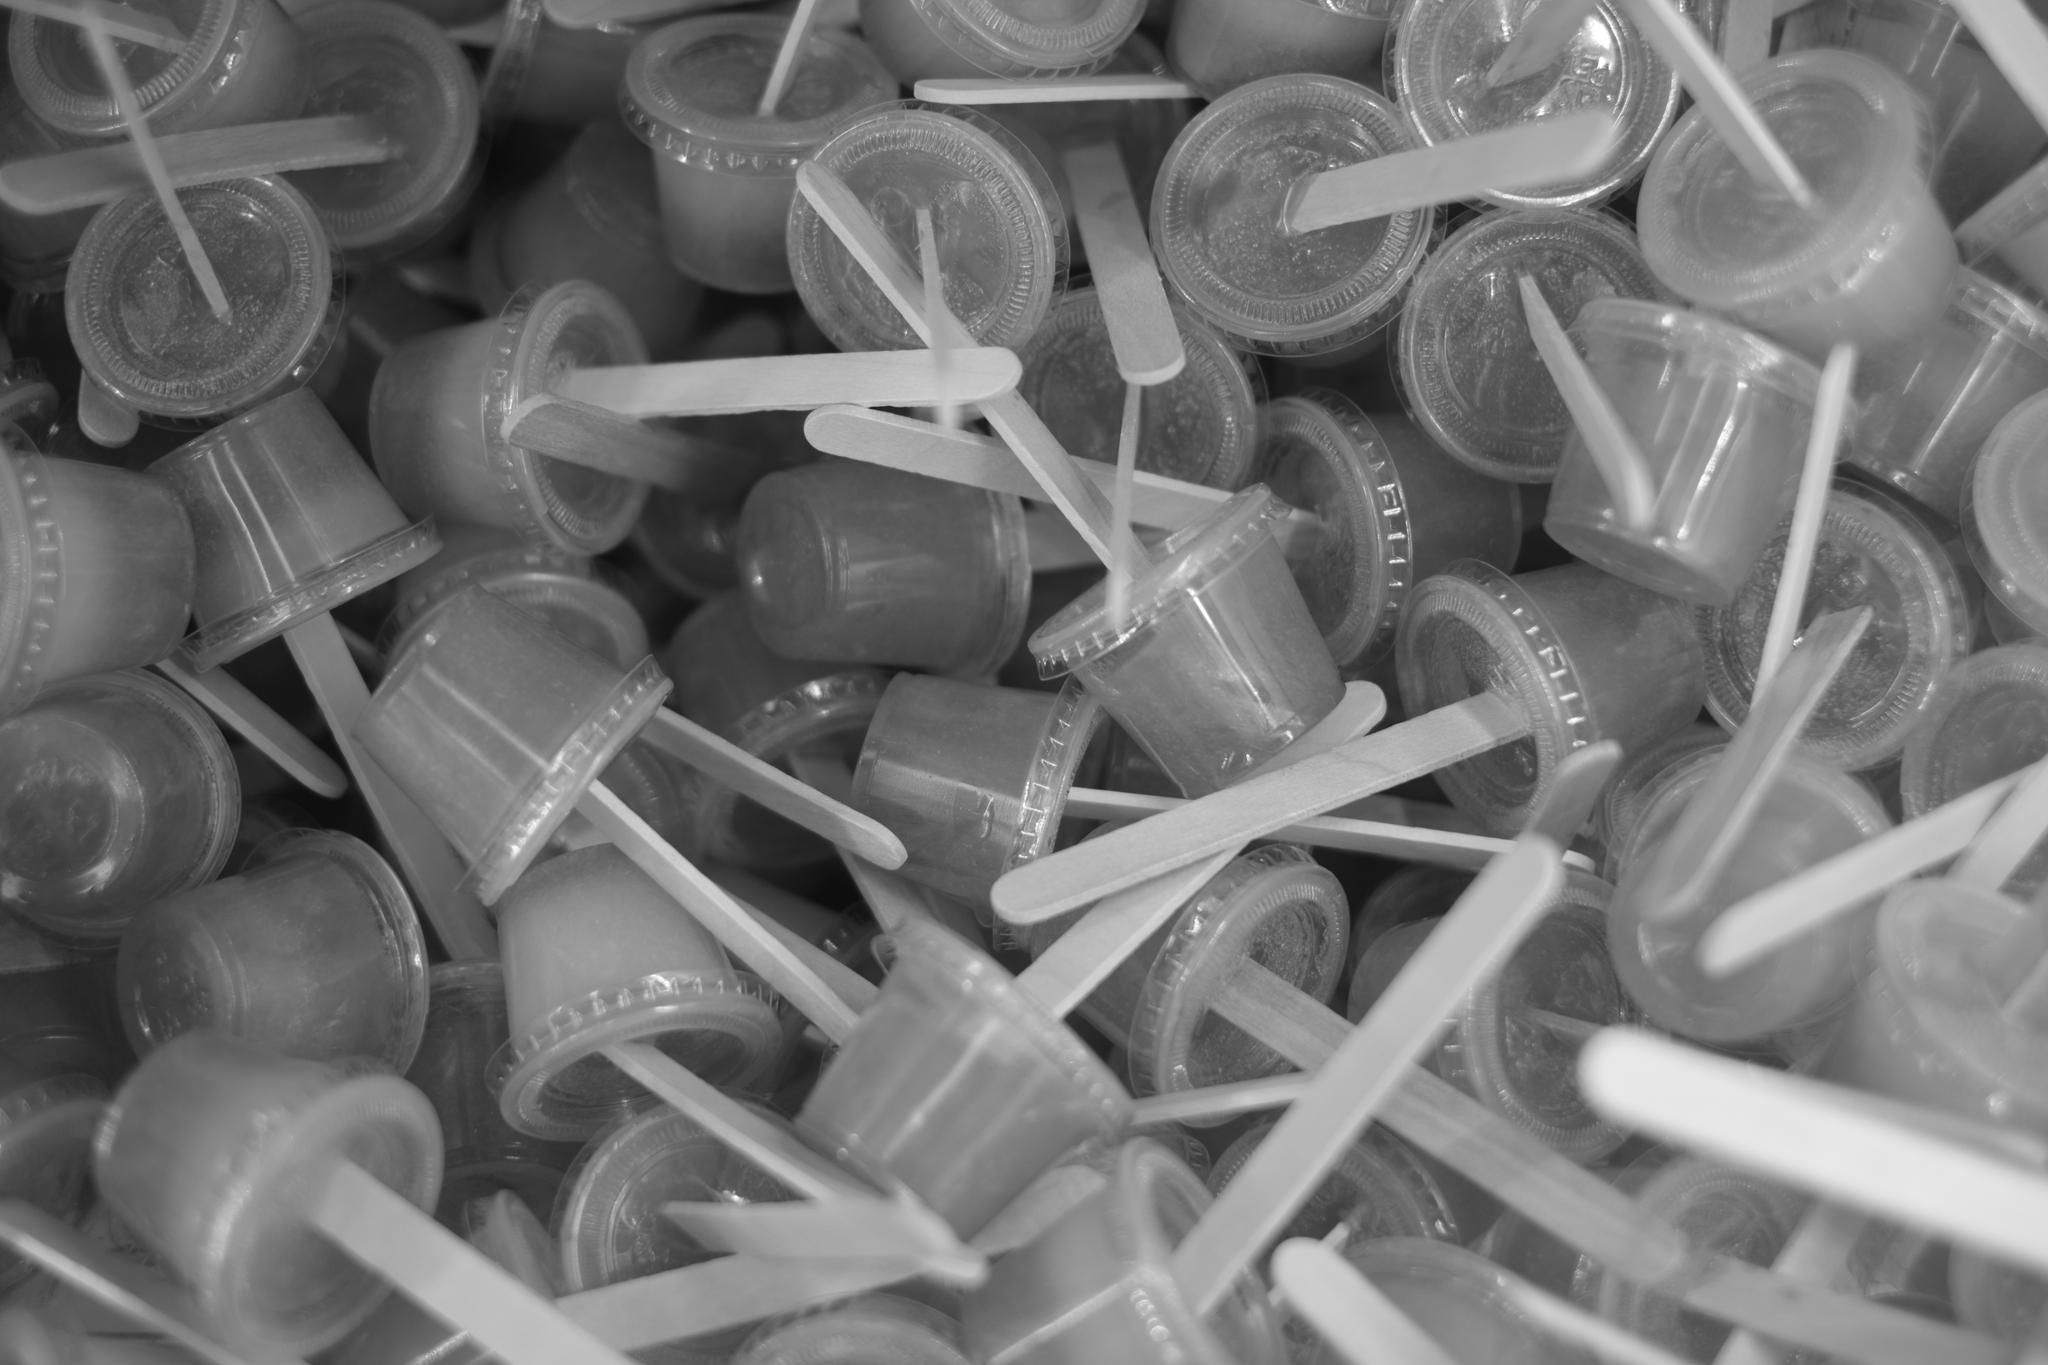 A pile of small plastic containers with attached lids and stirrers, all in grayscale